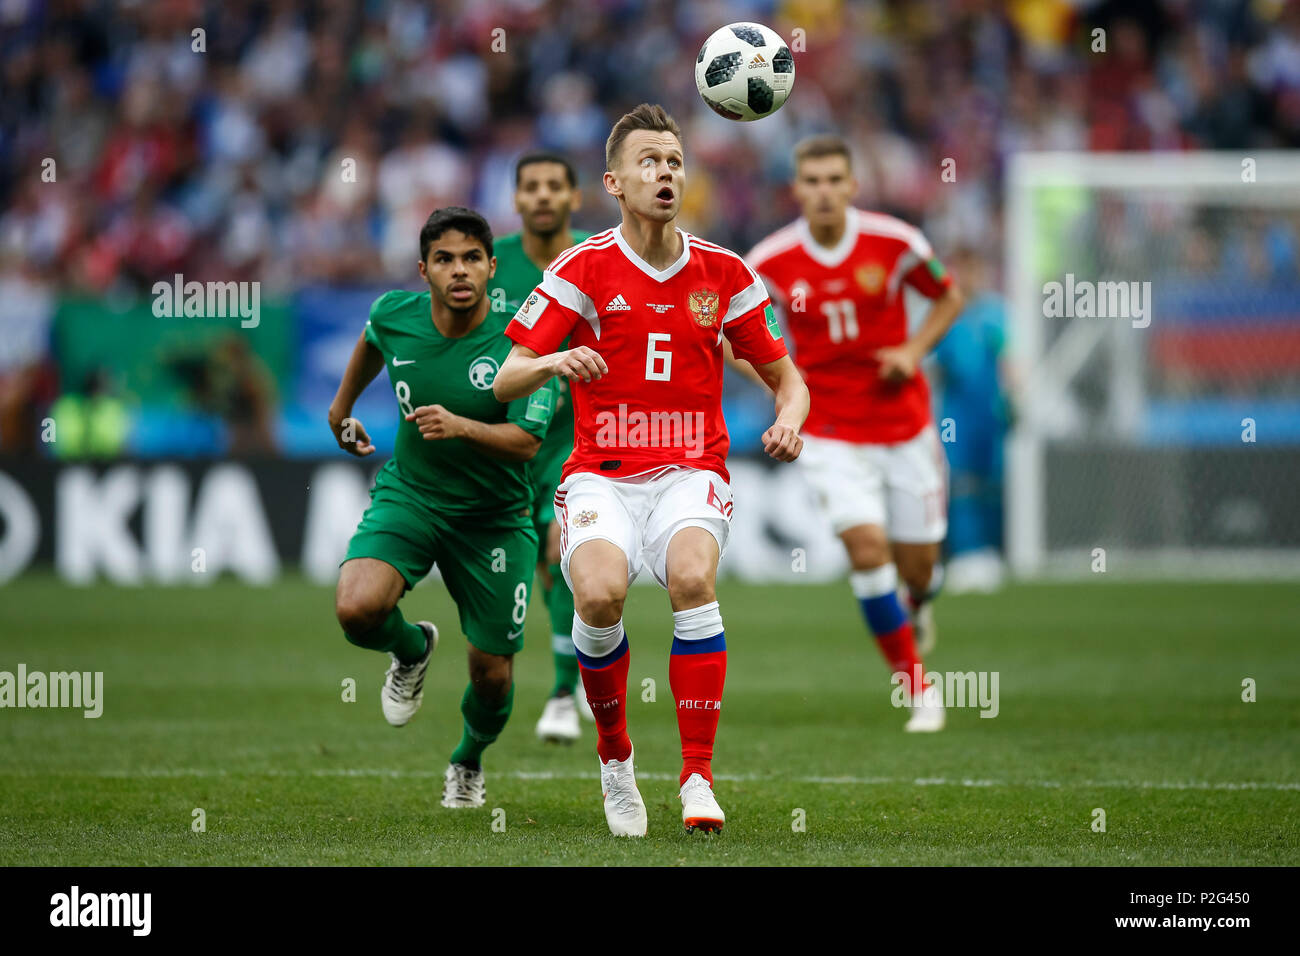 Moscow, Russia. 14th June 2018. Denis Cheryshev of Russia and Yahya Al-Shehri of Saudi Arabia during the 2018 FIFA World Cup Group A match between Russia and Saudi Arabia at Luzhniki Stadium on June 14th 2018 in Moscow, Russia. Credit: PHC Images/Alamy Live News Stock Photo